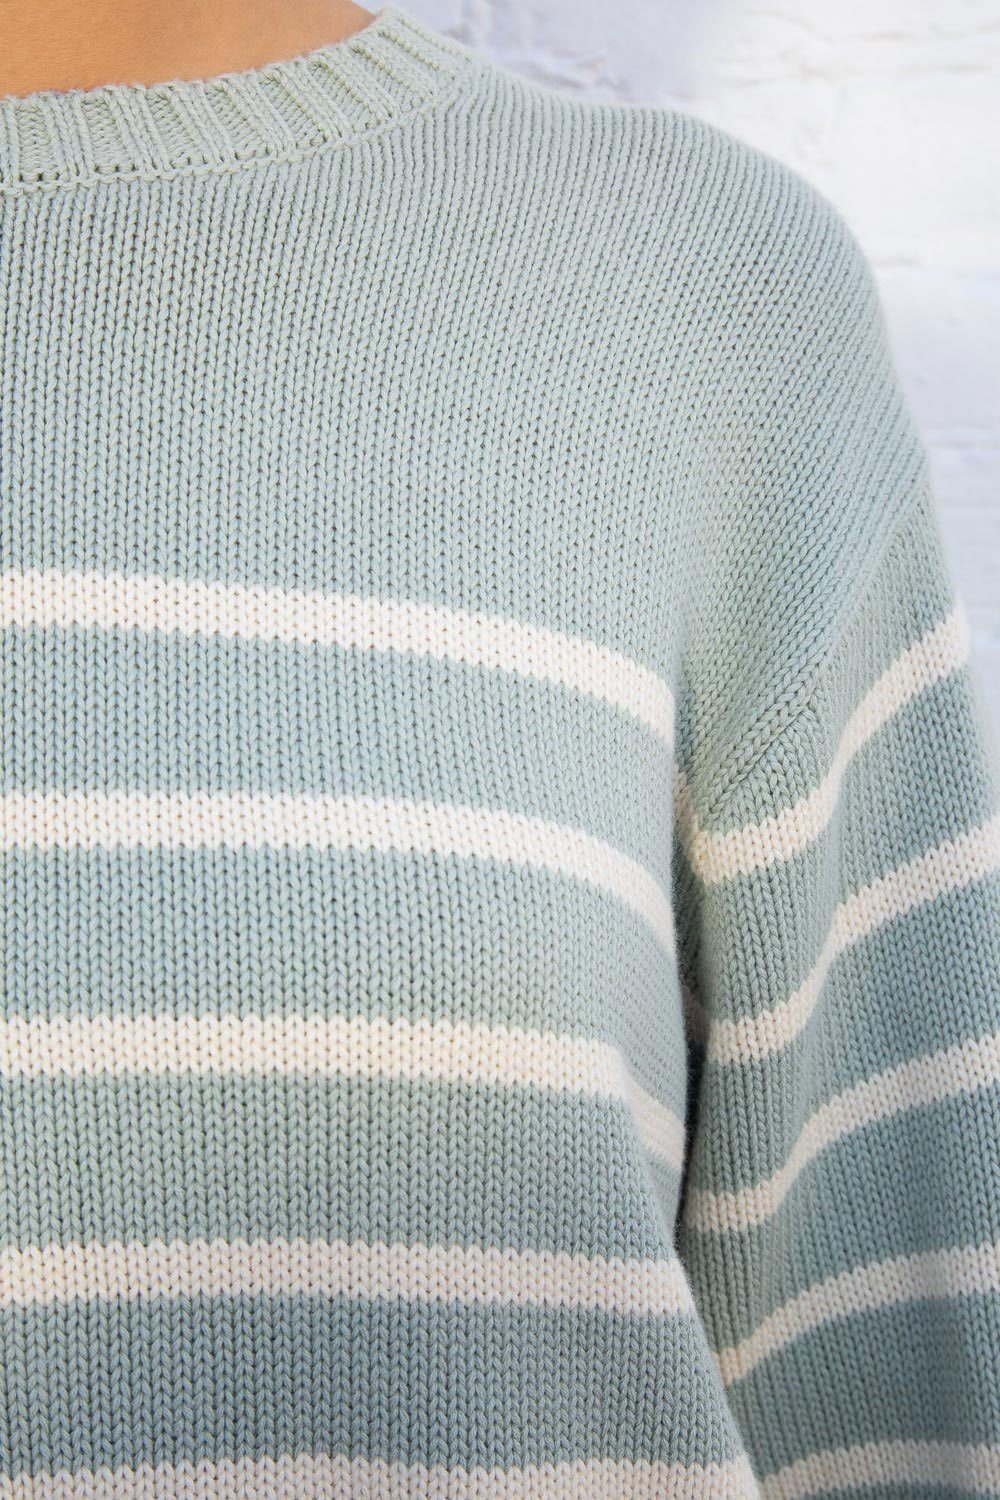 Ivory And Sage Stripes